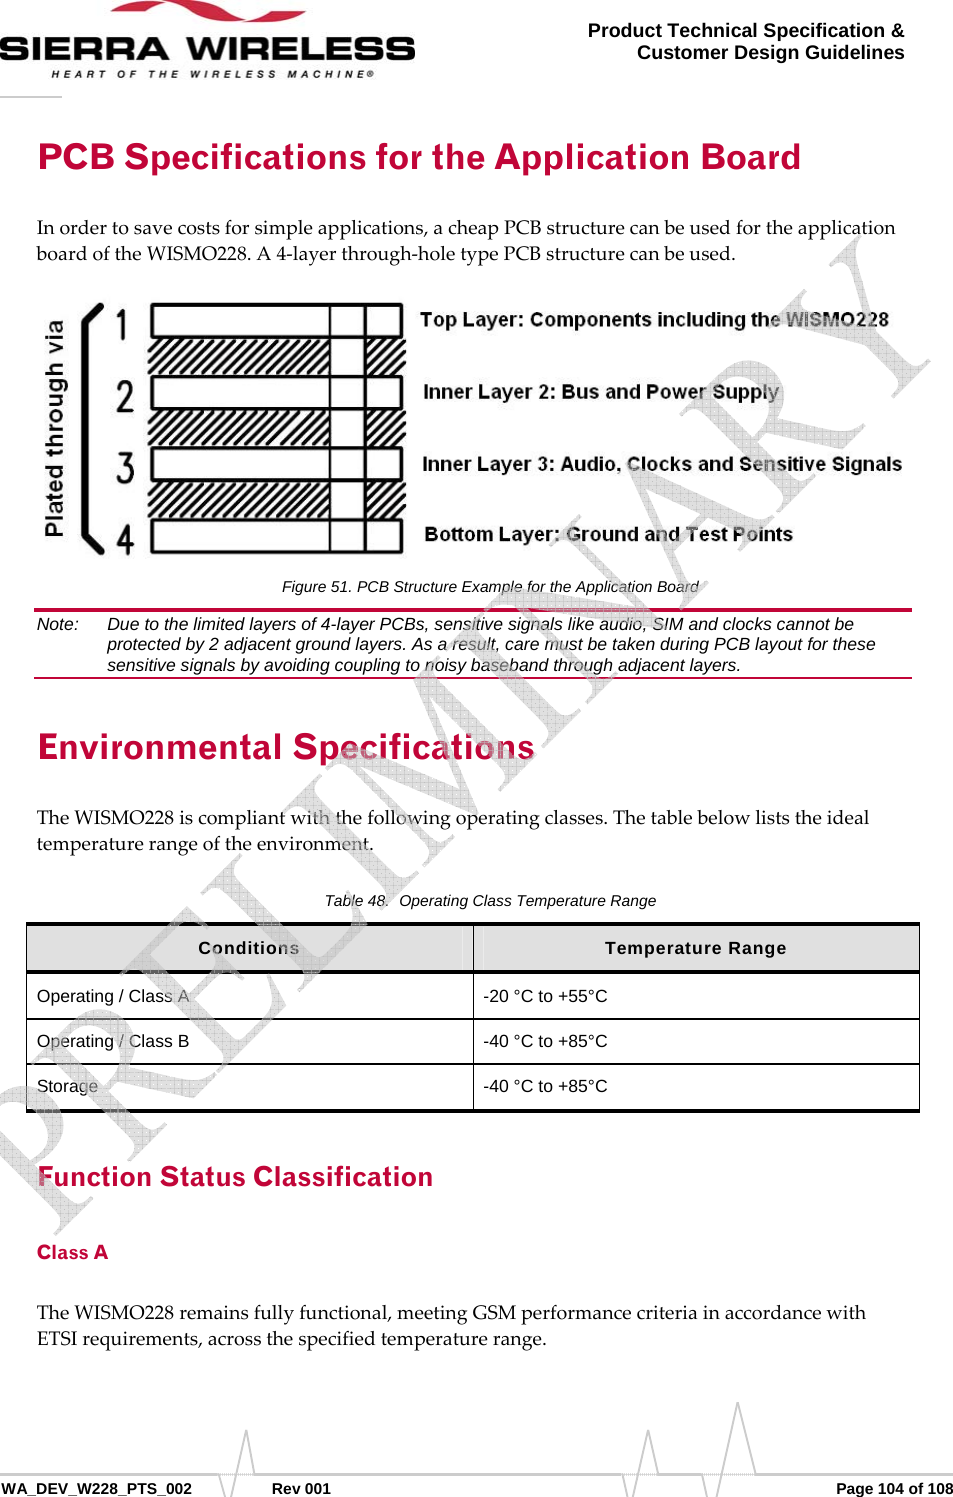      WA_DEV_W228_PTS_002 Rev 001  Page 104 of 108 Product Technical Specification &amp; Customer Design Guidelines PCB Specifications for the Application Board Inordertosavecostsforsimpleapplications,acheapPCBstructurecanbeusedfortheapplicationboardoftheWISMO228.A4‐layerthrough‐holetypePCBstructurecanbeused.Figure 51. PCB Structure Example for the Application Board Note:   Due to the limited layers of 4-layer PCBs, sensitive signals like audio, SIM and clocks cannot be protected by 2 adjacent ground layers. As a result, care must be taken during PCB layout for these sensitive signals by avoiding coupling to noisy baseband through adjacent layers. Environmental Specifications TheWISMO228iscompliantwiththefollowingoperatingclasses.Thetablebelowliststheidealtemperaturerangeoftheenvironment.Table 48.  Operating Class Temperature Range Conditions  Temperature Range Operating / Class A  -20 °C to +55°C Operating / Class B   -40 °C to +85°C Storage  -40 °C to +85°C Function Status Classification Class A TheWISMO228remainsfullyfunctional,meetingGSMperformancecriteriainaccordancewithETSIrequirements,acrossthespecifiedtemperaturerange.   